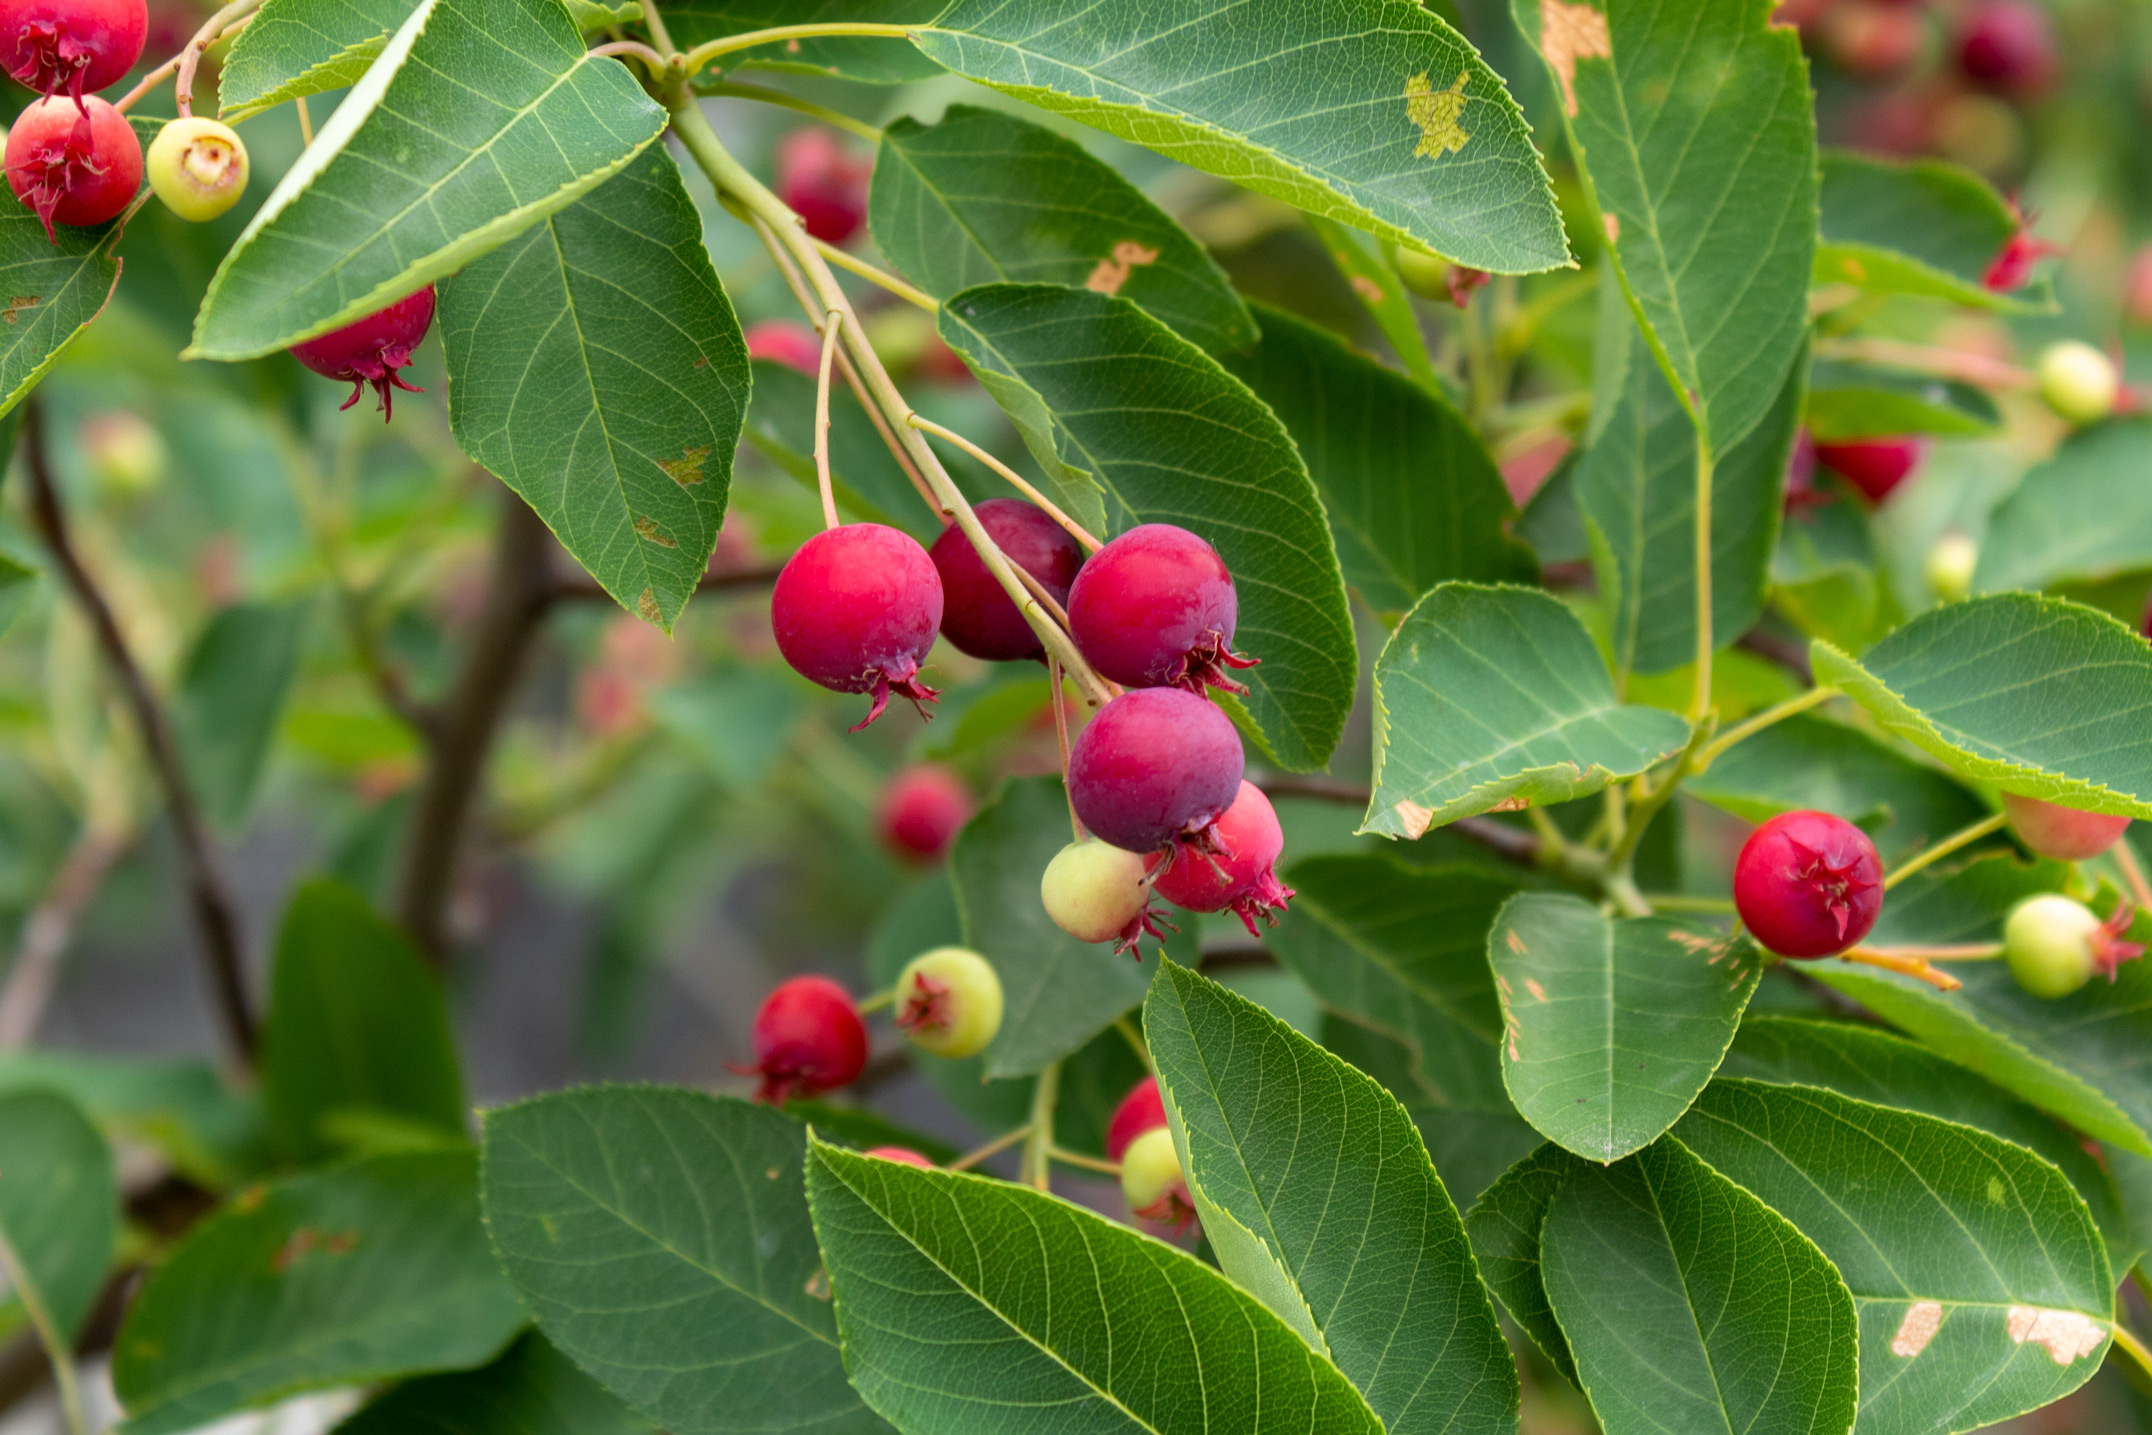 Small red and yellow-green round fruits growing on a leafy tree